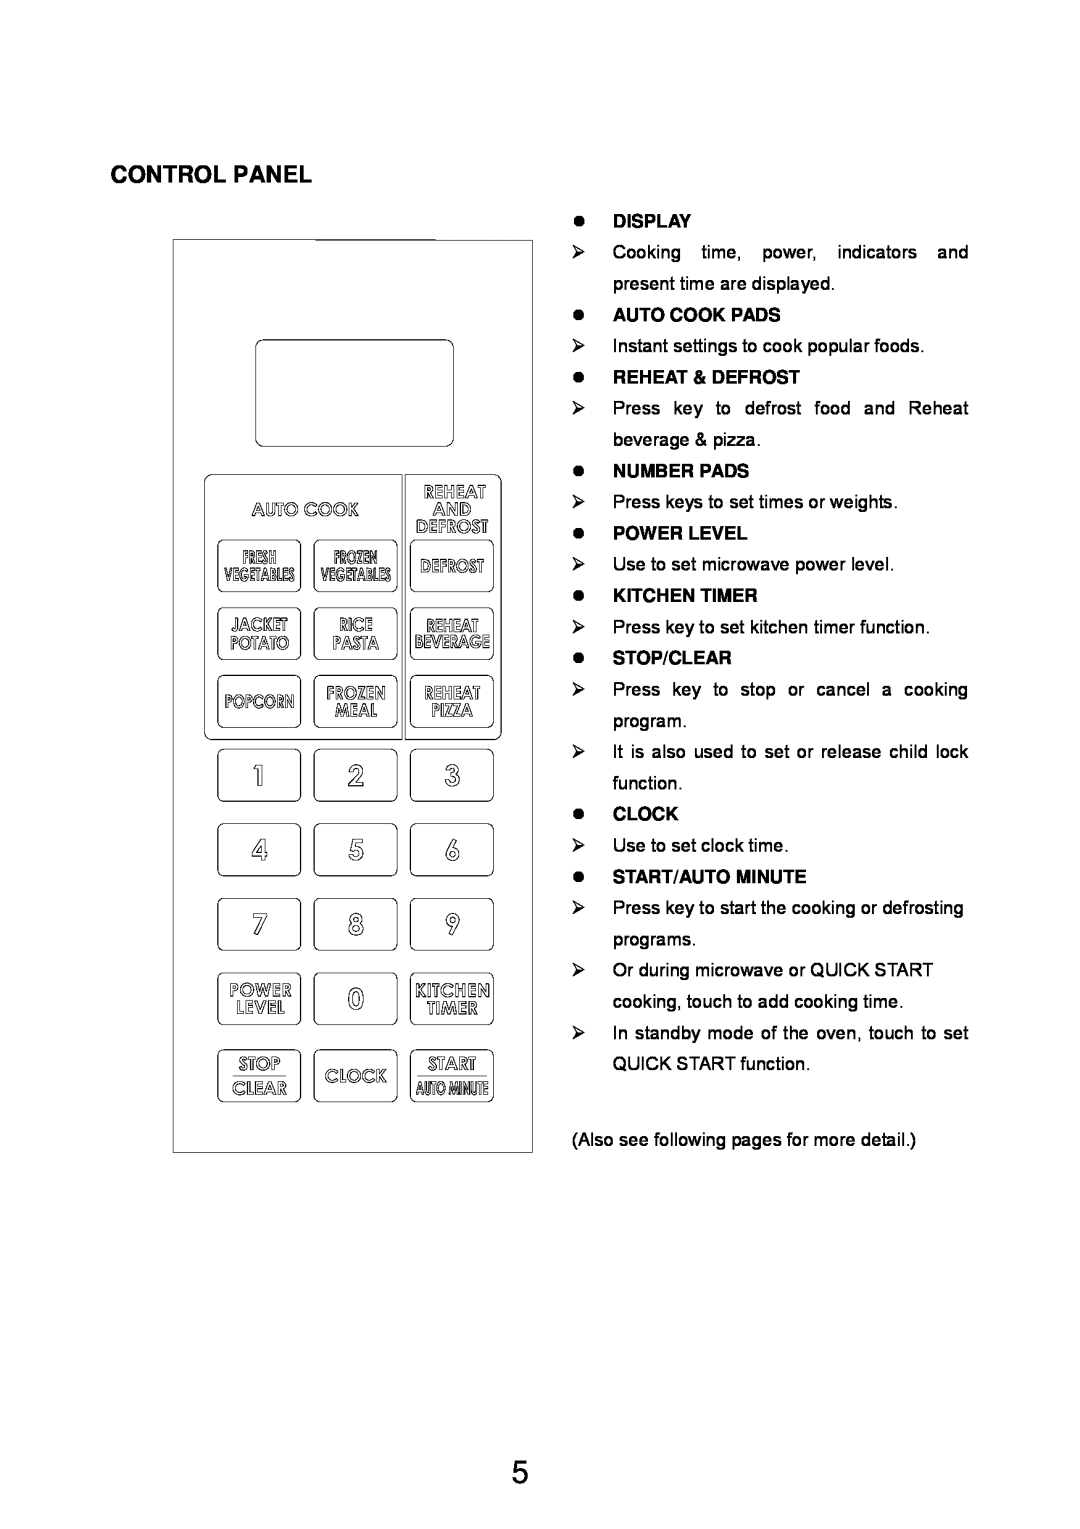 Sharp Microwave Oven Control Panel, Display, Auto Cook Pads, Reheat & Defrost, Number Pads, Power Level, Kitchen Timer 